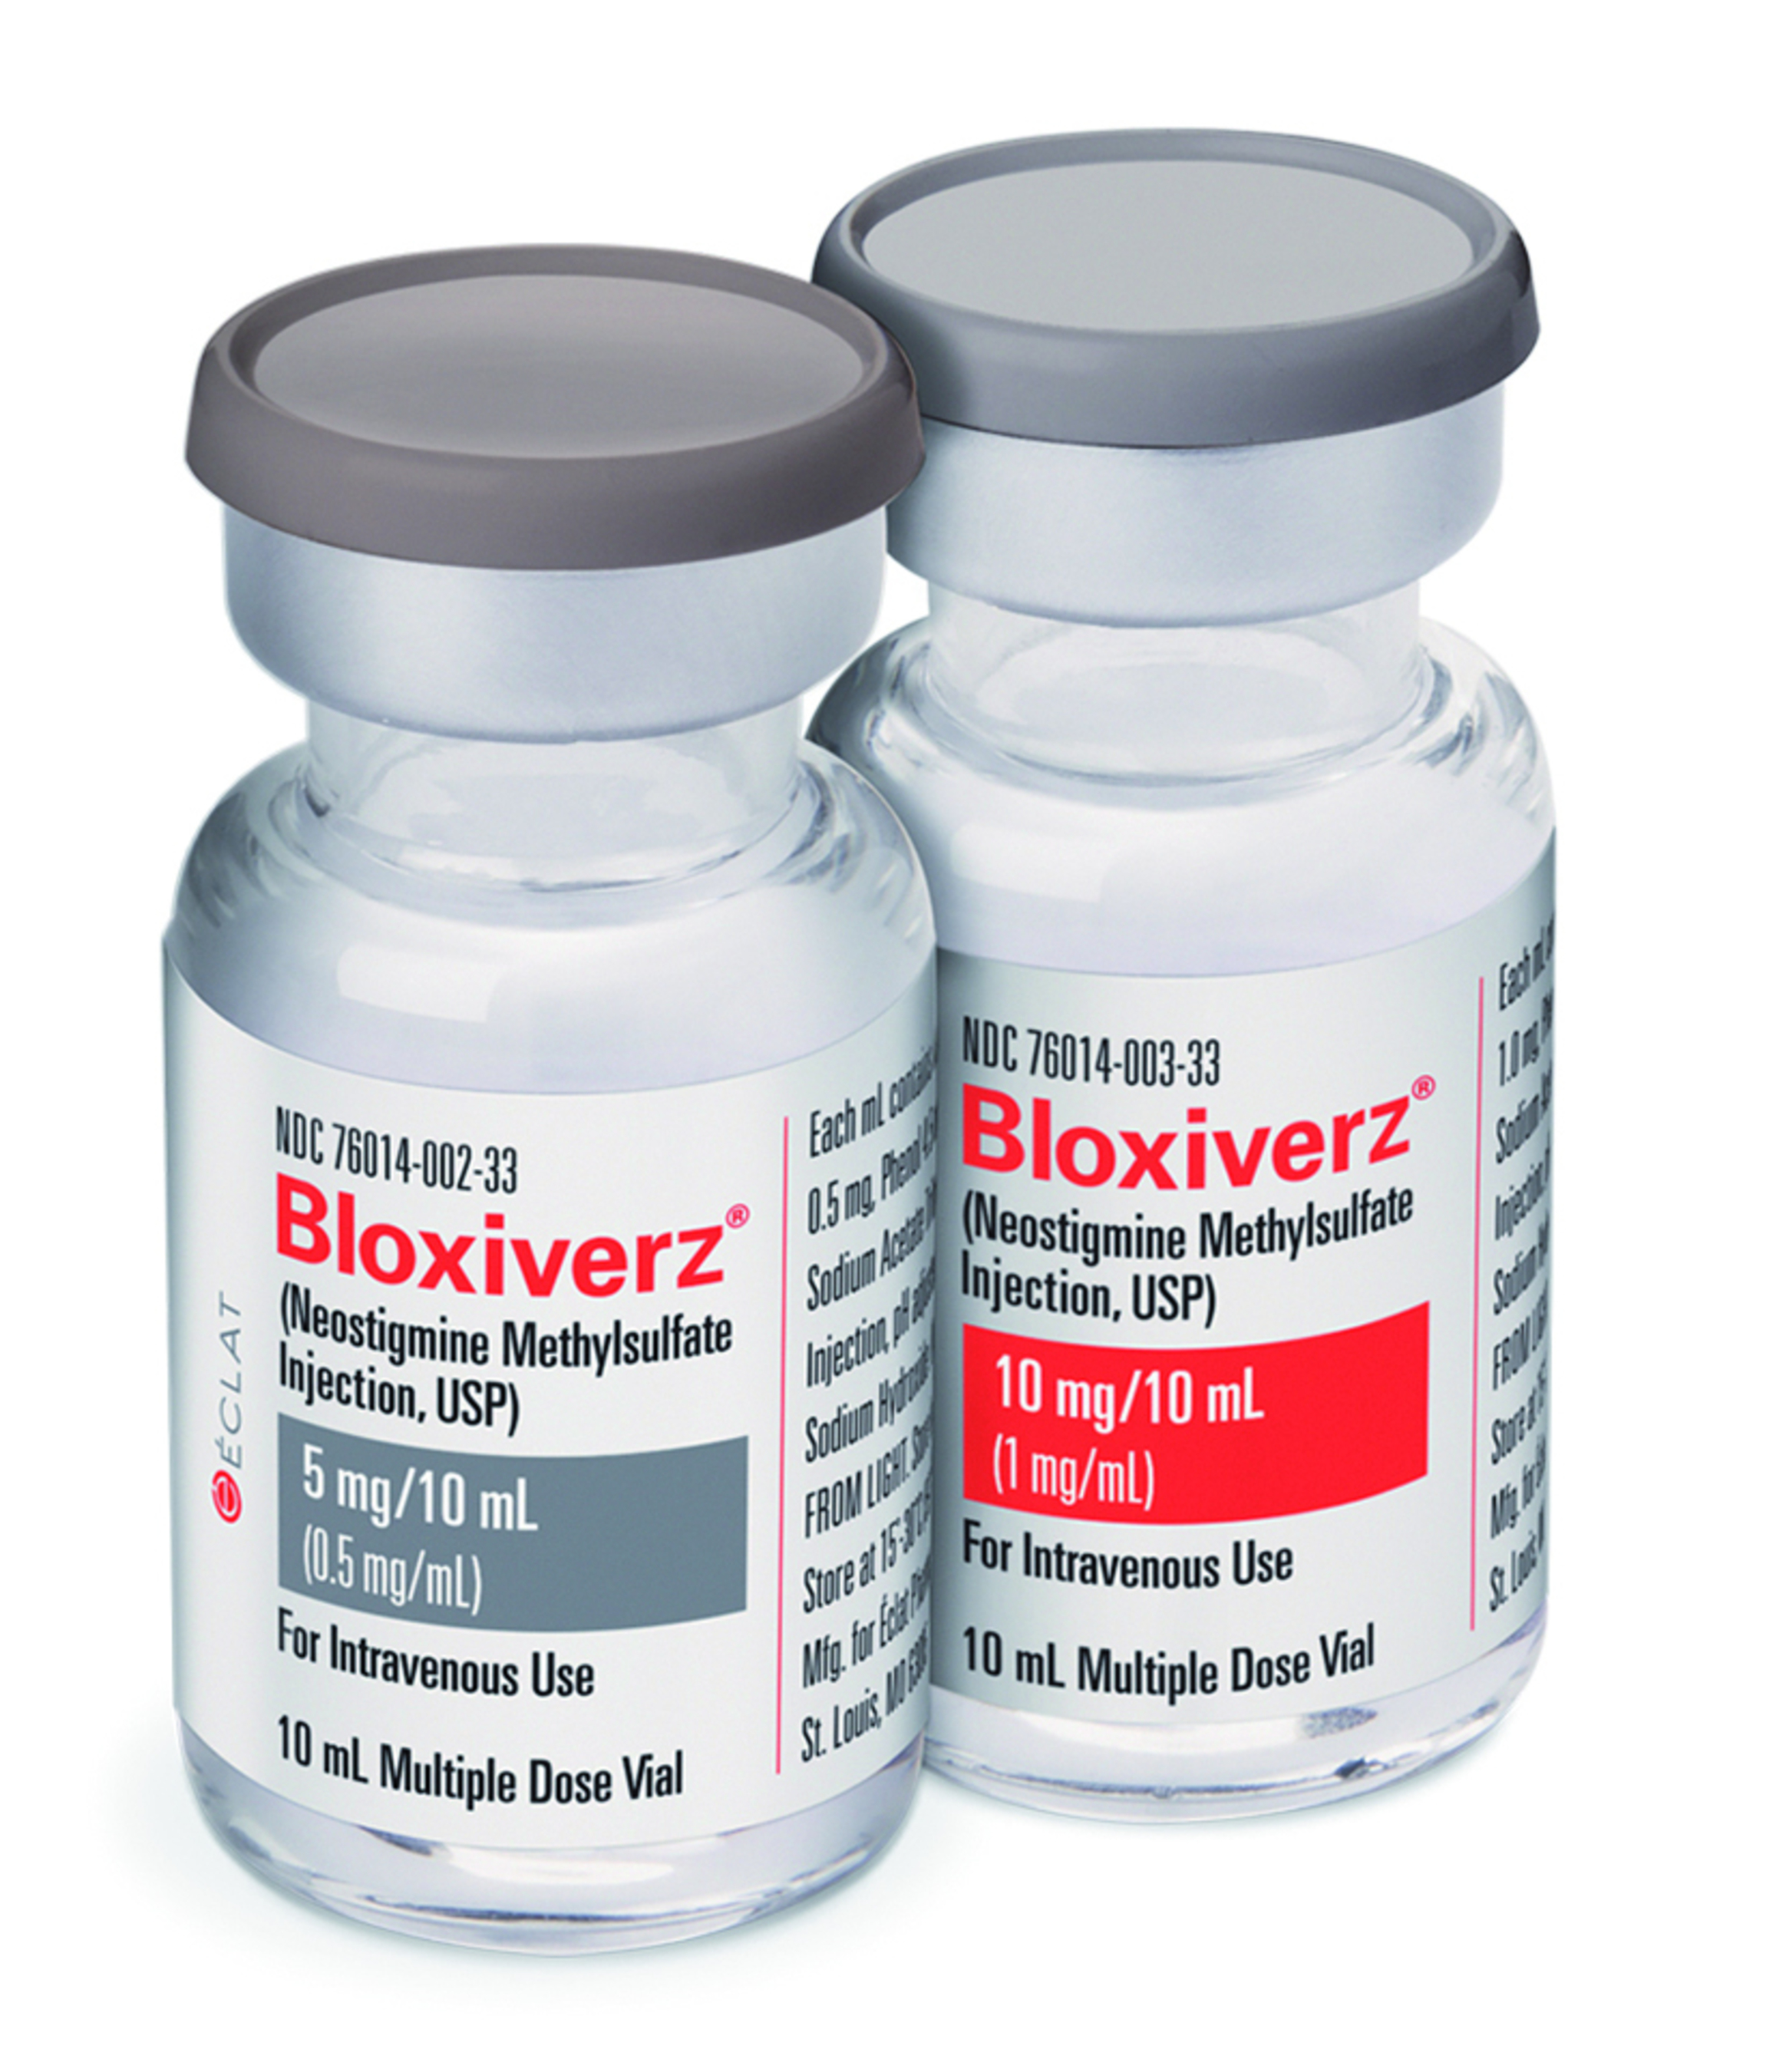 BLOXIVERZ(R), The Only FDA-Approved Neostigmine Methylsulfate Injection Available With All Leading Wholesalers!  (PRNewsFoto/Eclat Pharmaceuticals )